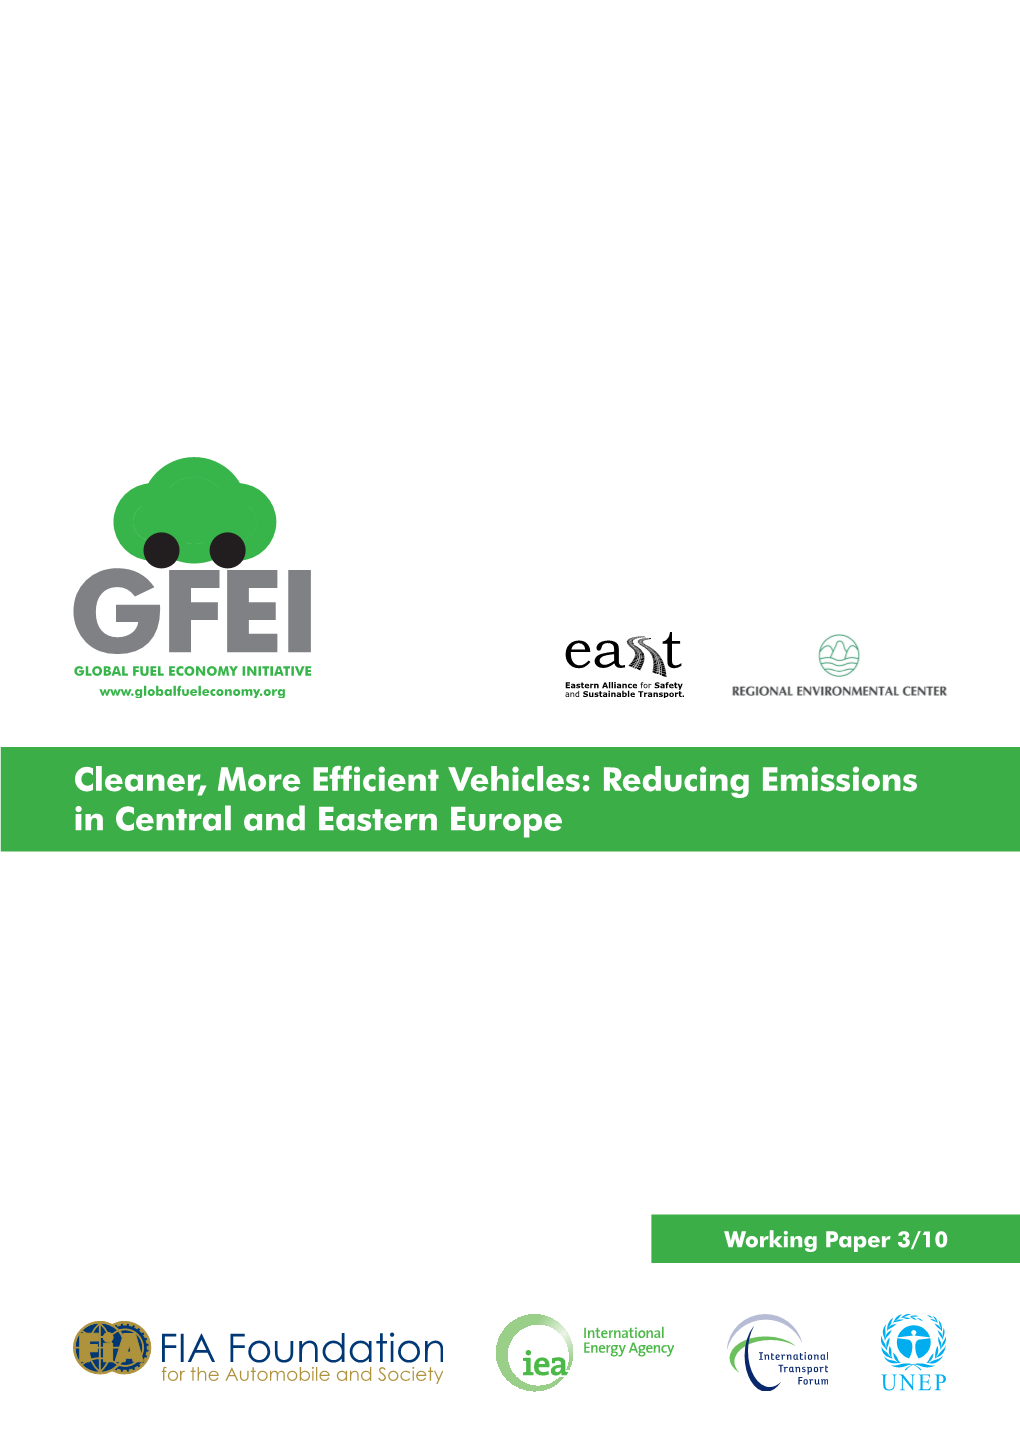 Cleaner, More Efficient Vehicles: Reducing Emissions in Central and Eastern Europe